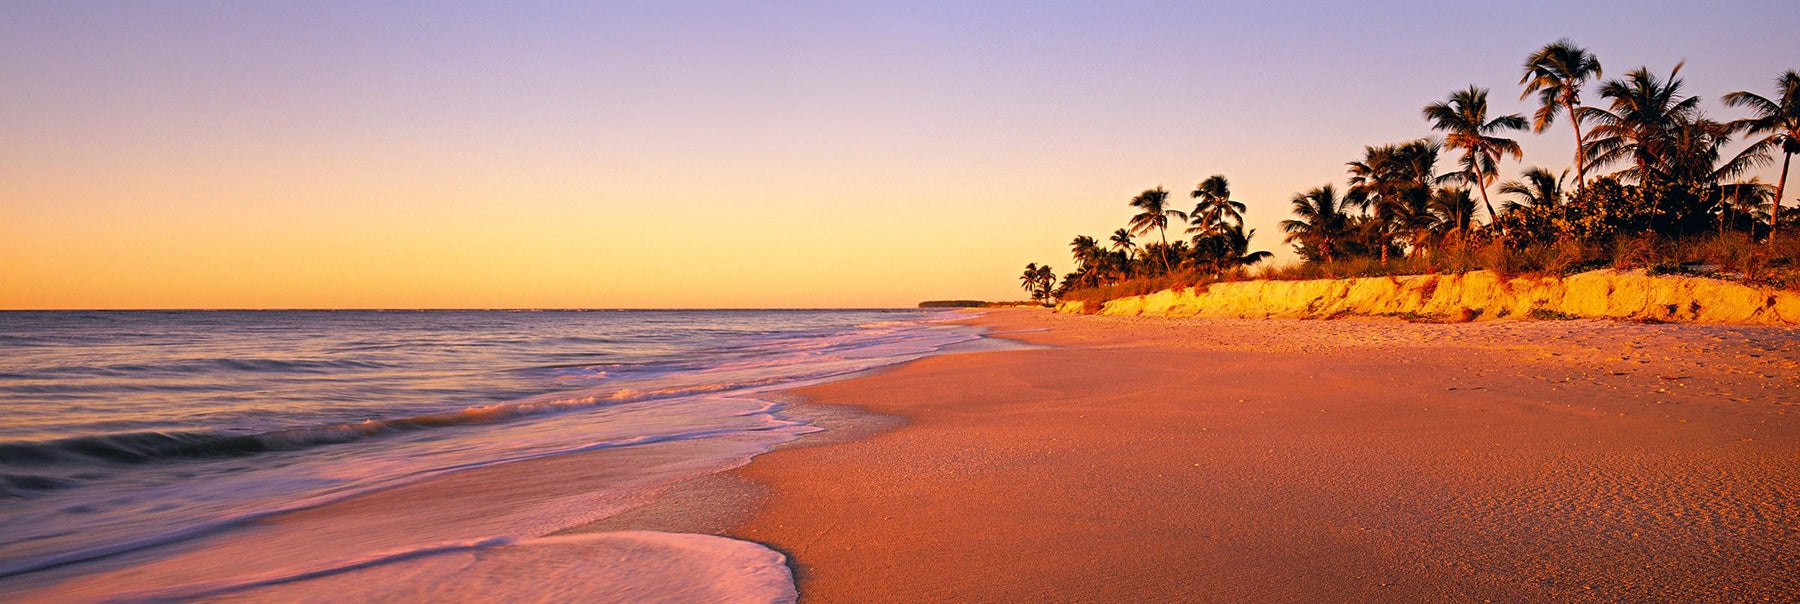 Golden sand beach lined with Palm trees on the shores of Captiva Island Florida